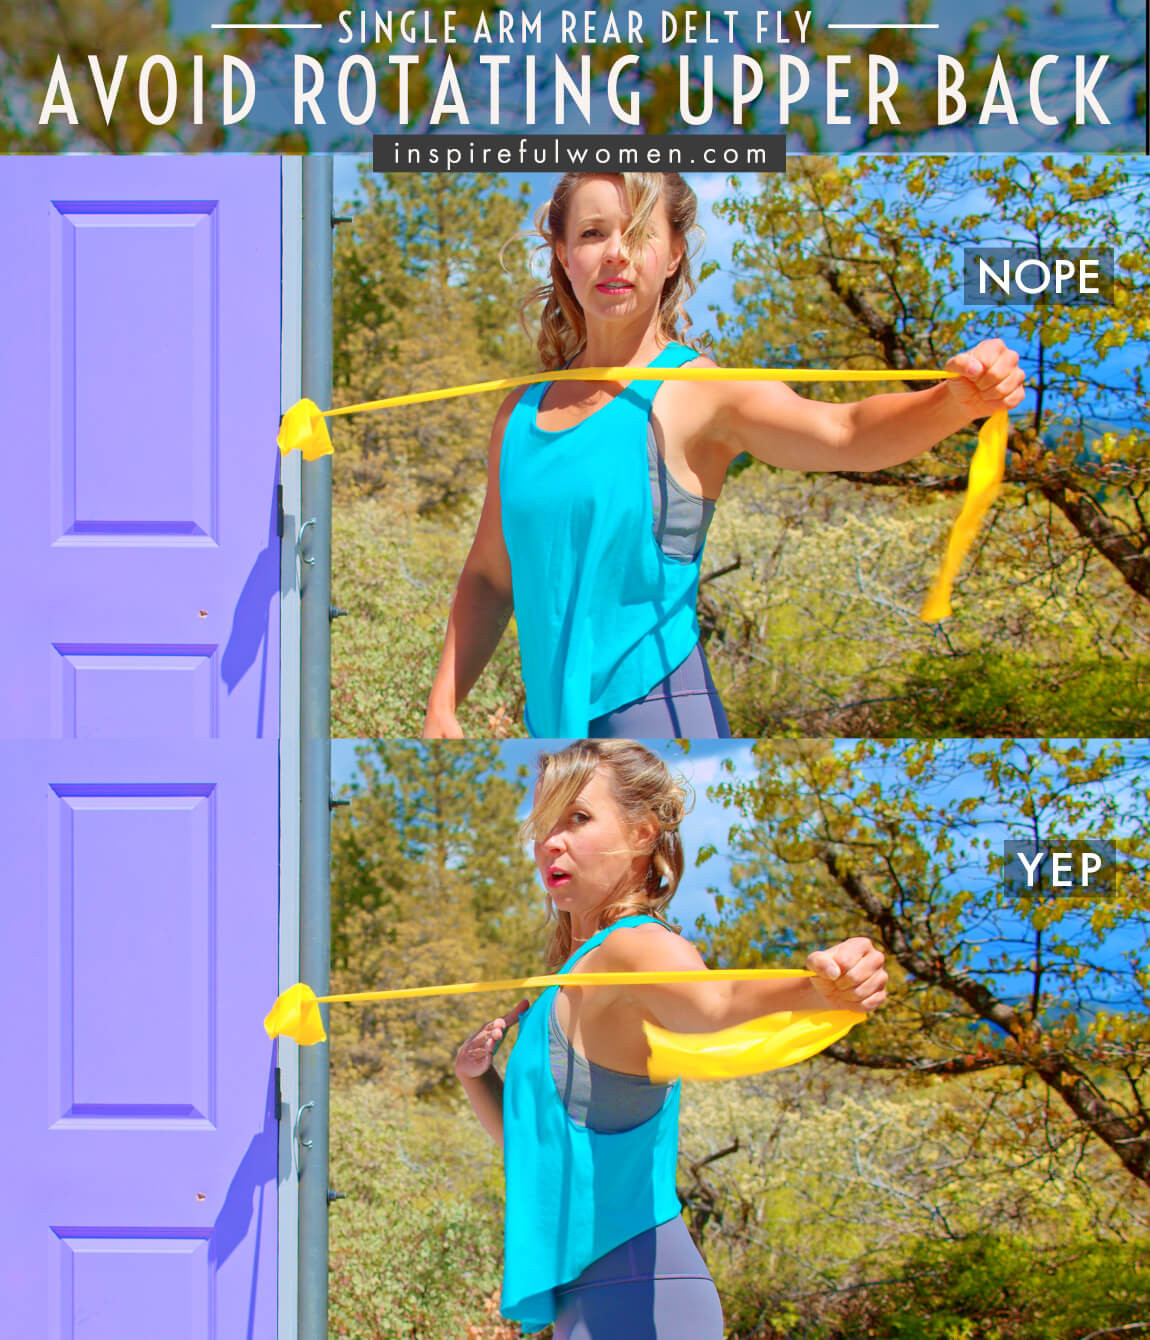 avoid-rotating-upper-back-one-arm-standing-rear-deltoid-fly-wall-anchored-common-mistakes